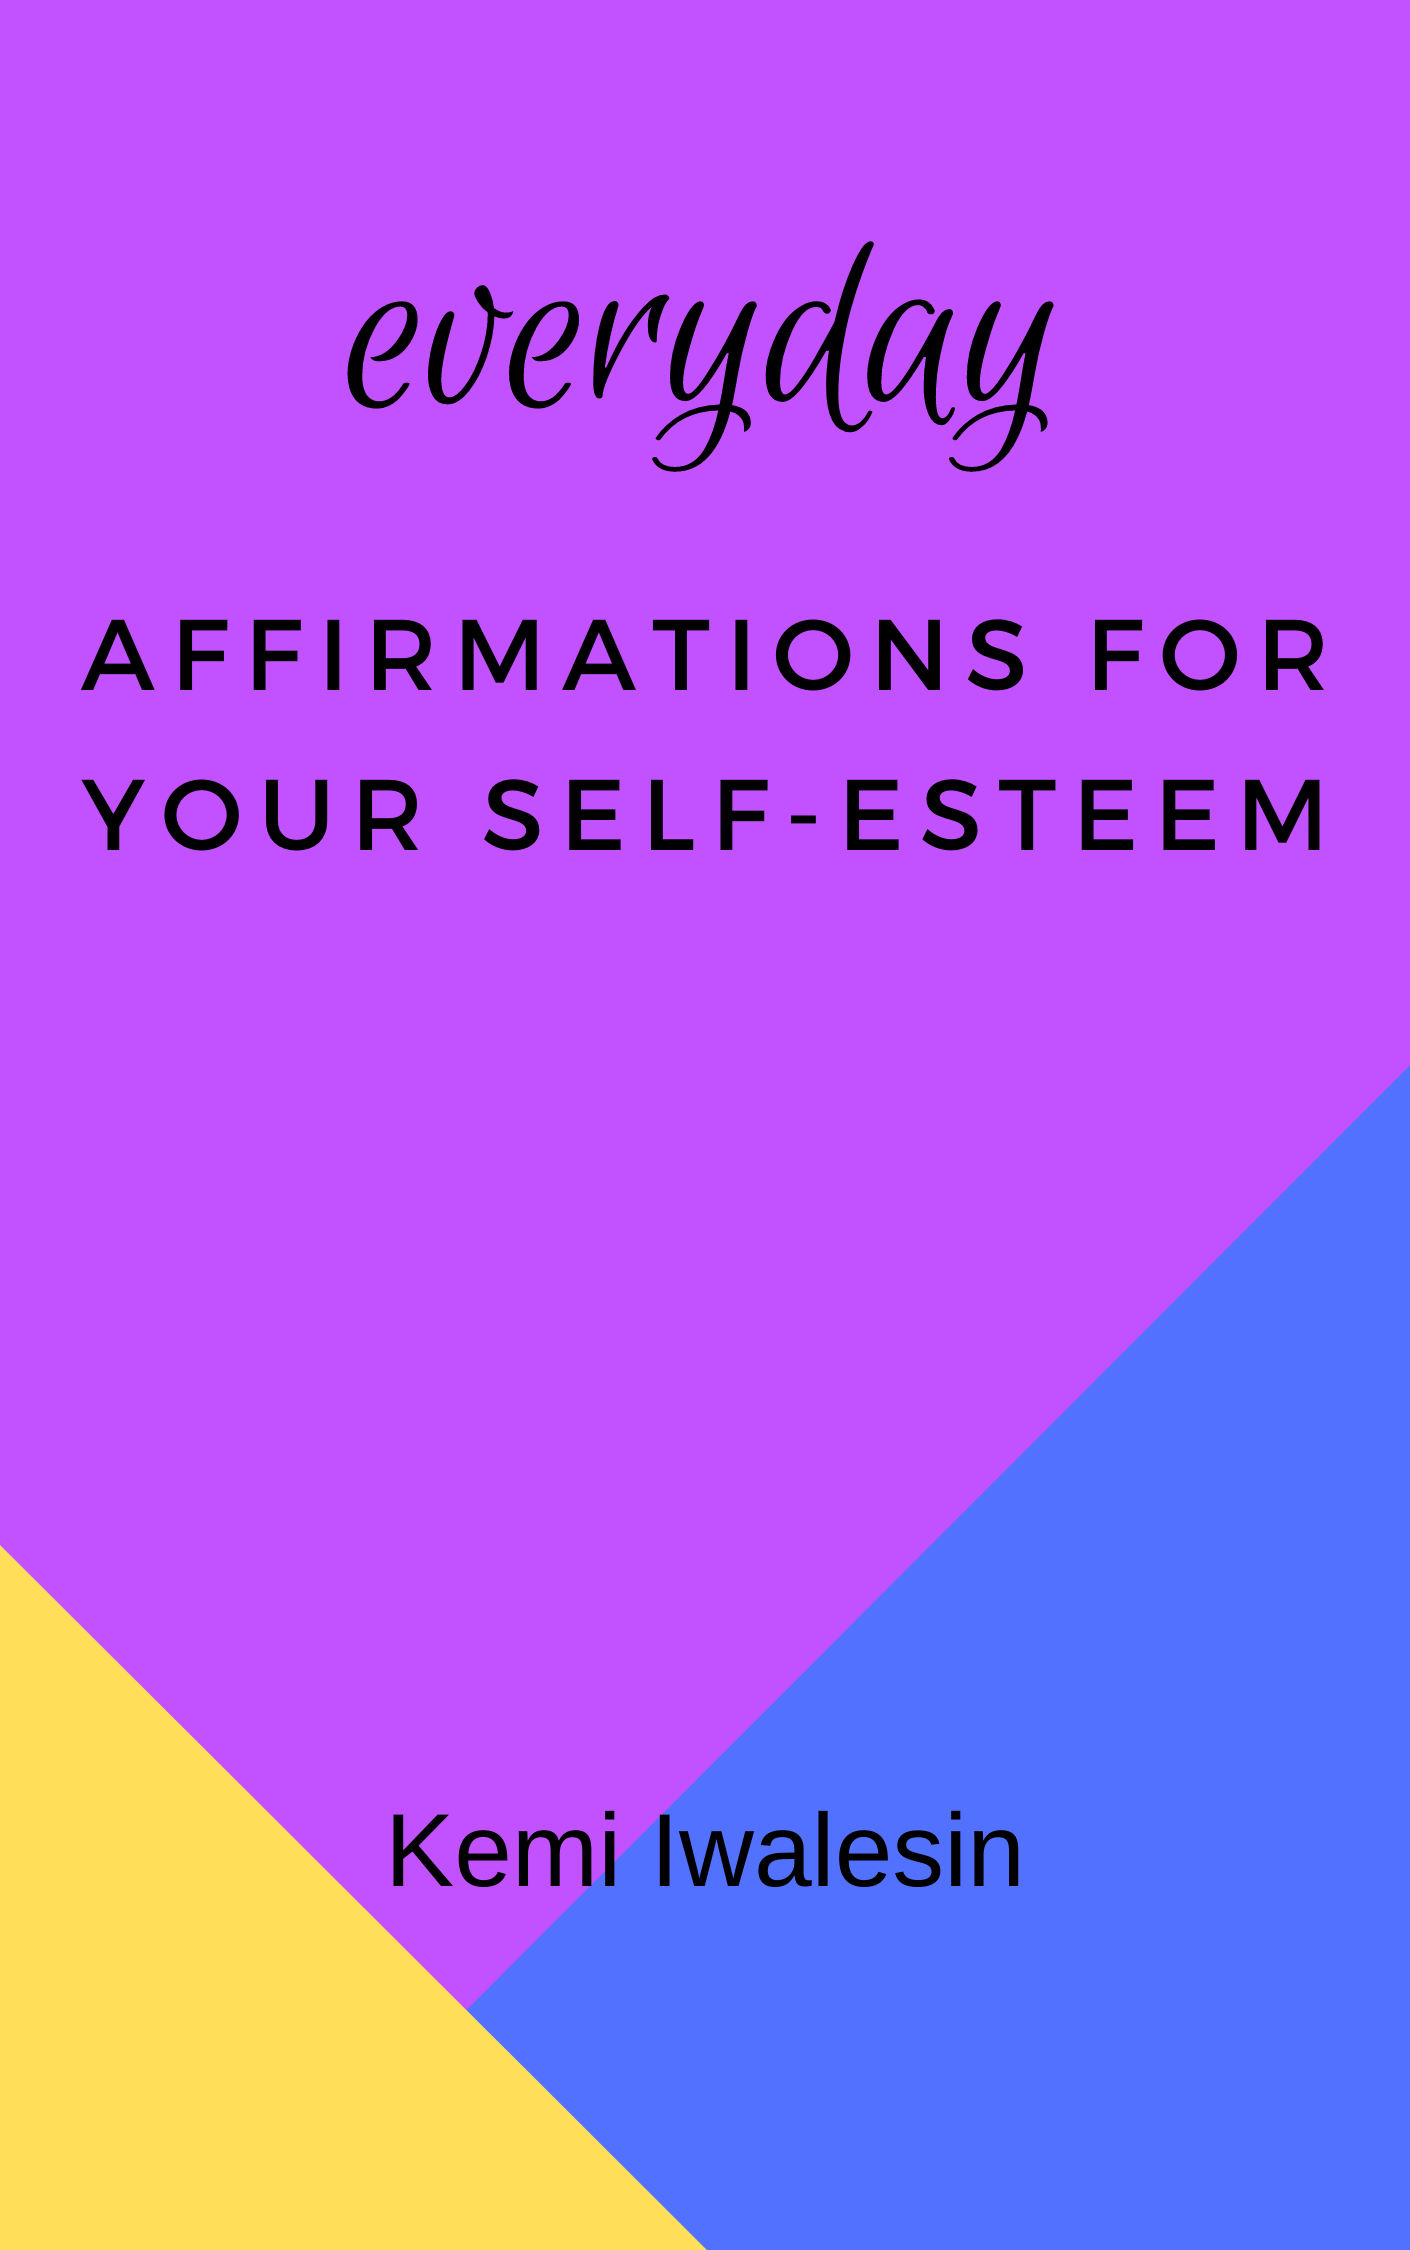 Everyday-Affirmations-For-Your-Self-Esteem-